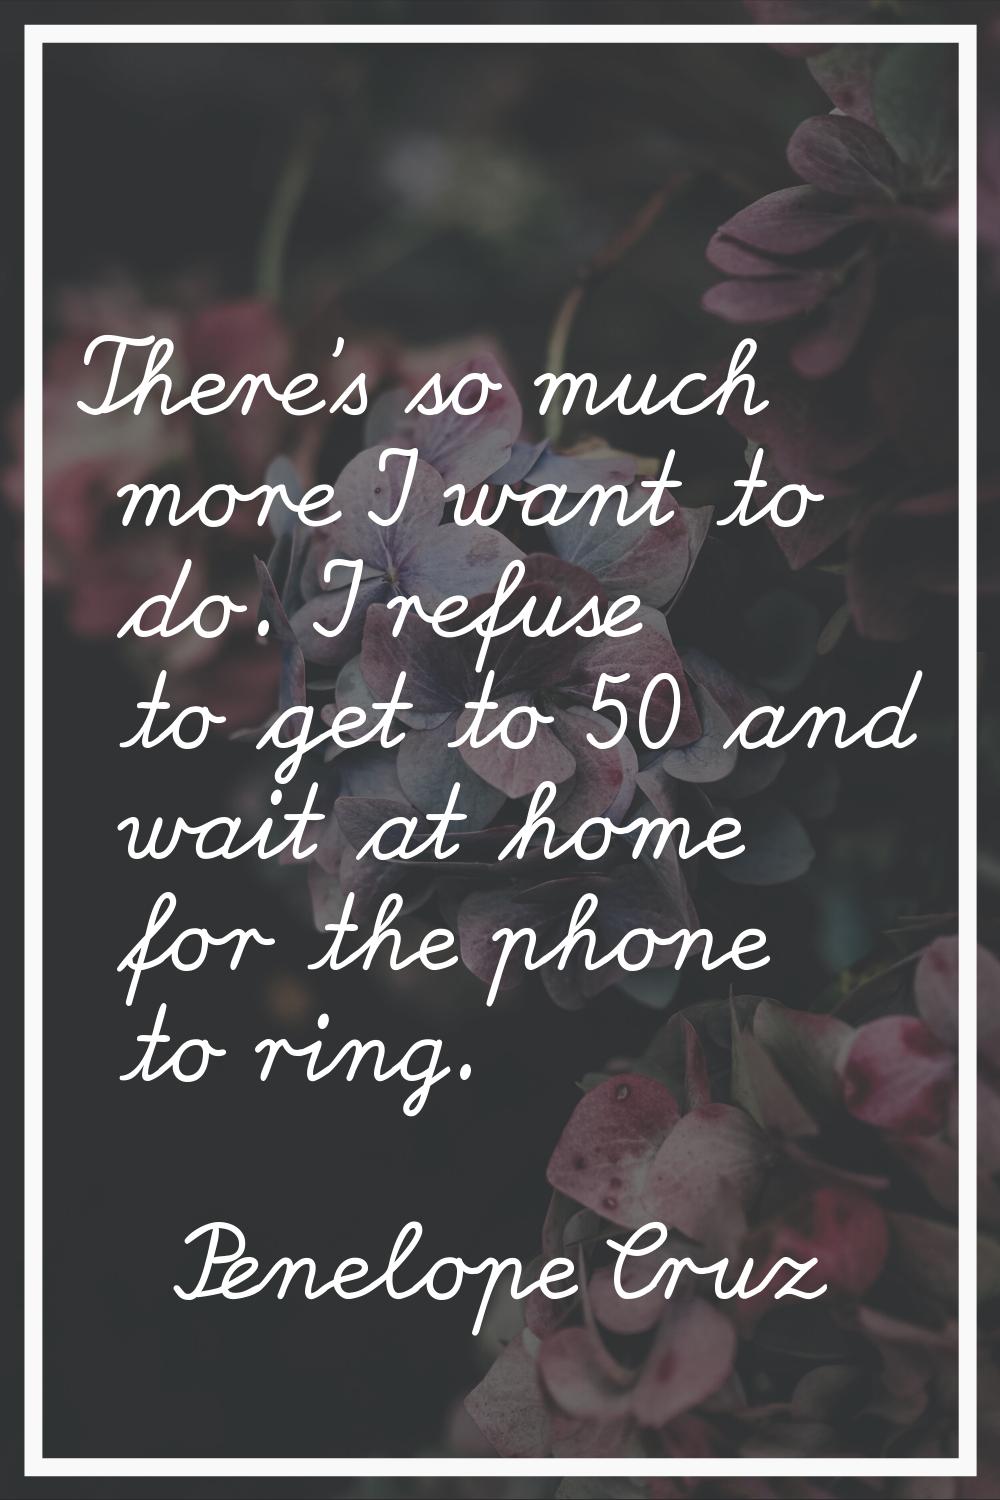 There's so much more I want to do. I refuse to get to 50 and wait at home for the phone to ring.